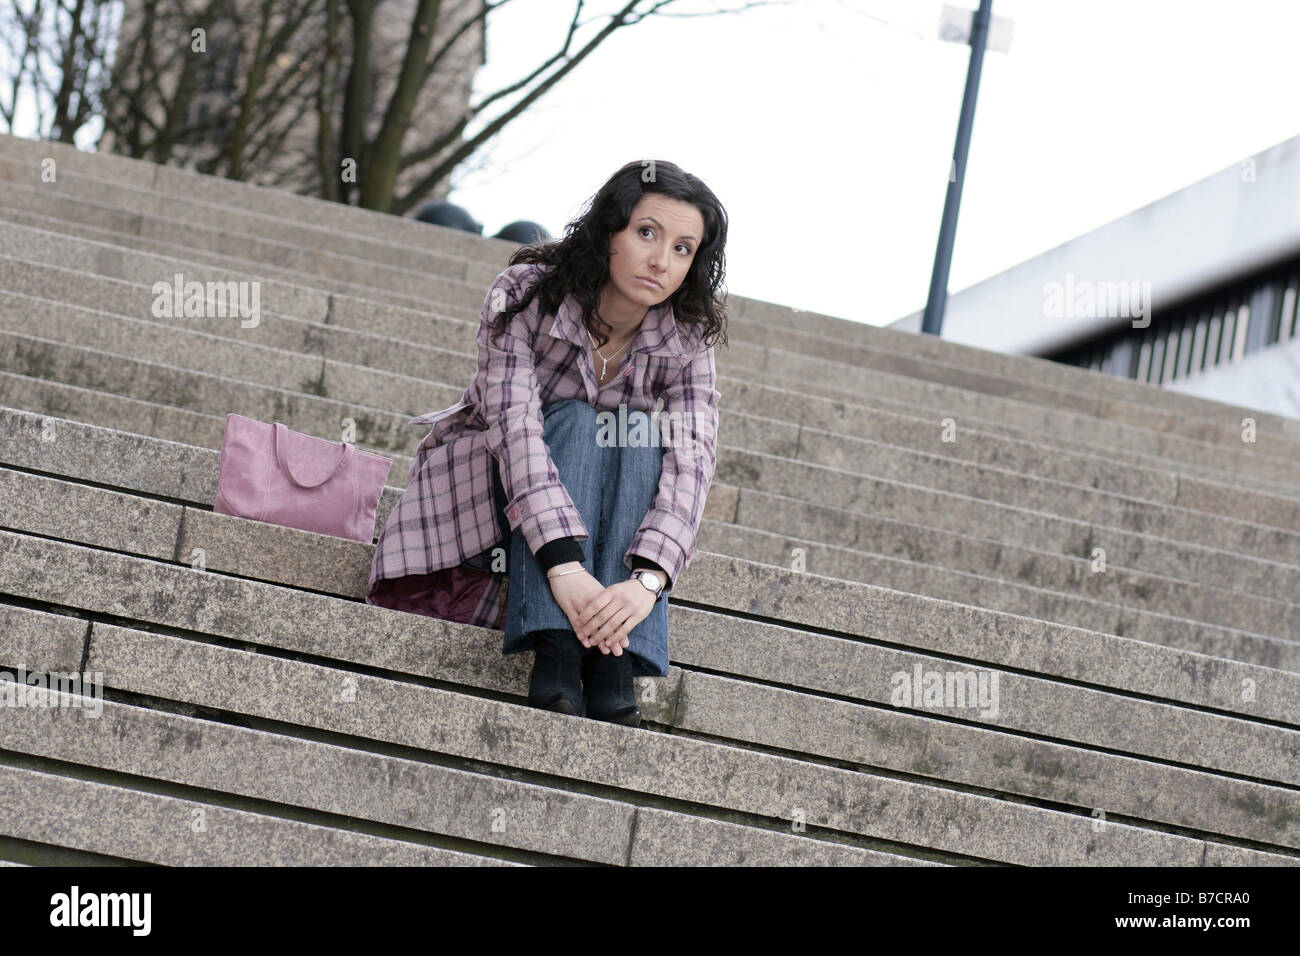 young darkhaired woman sitting on stairs, waiting Stock Photo